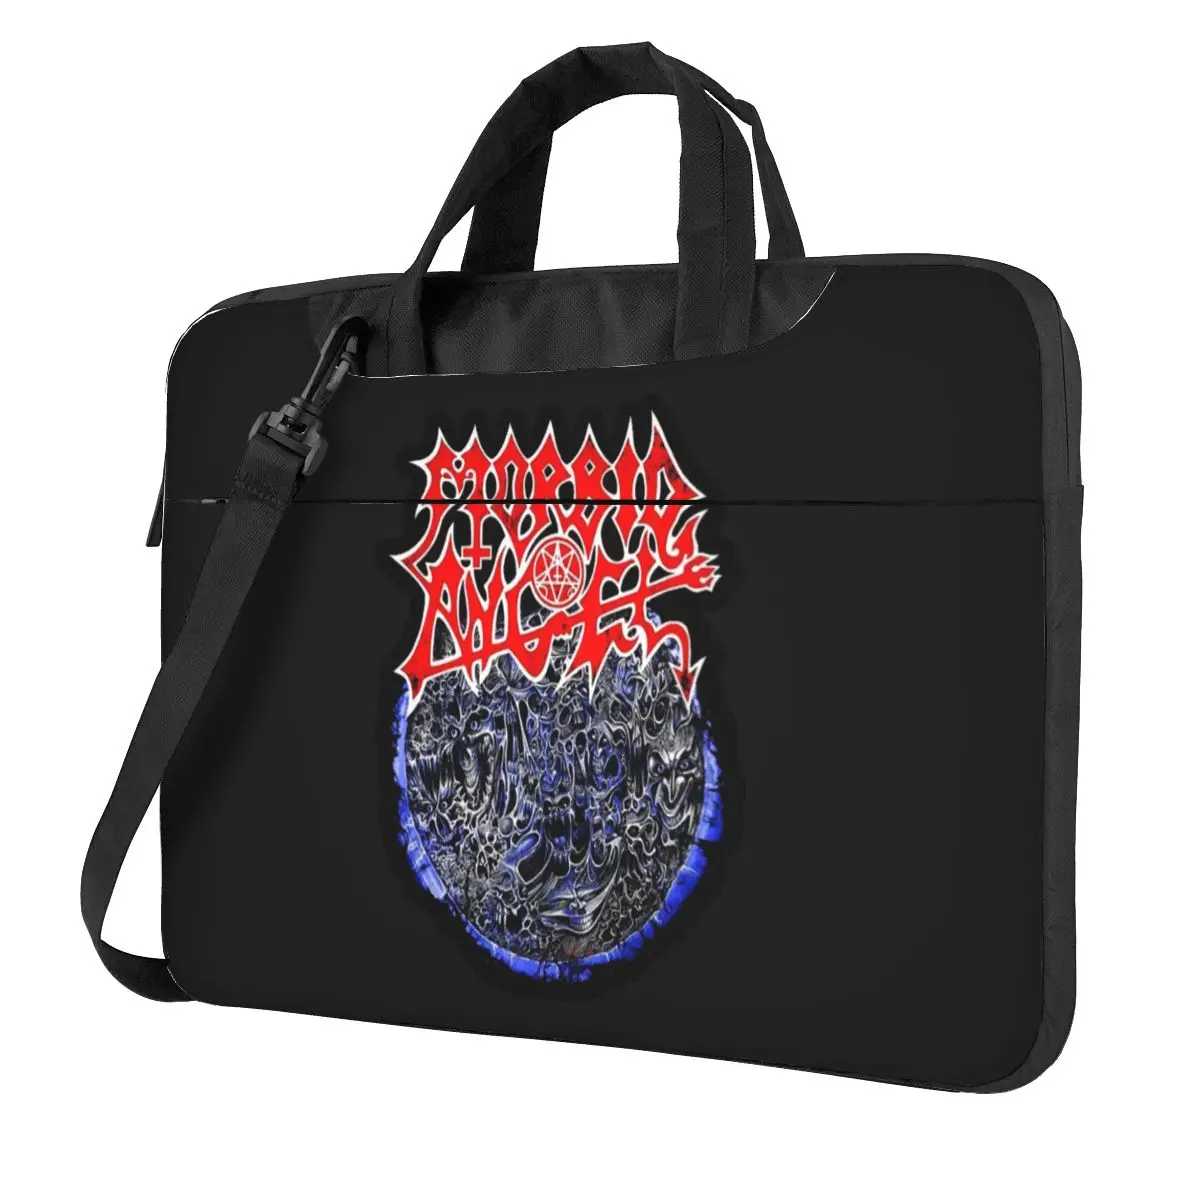 

Morbid Angel Death Metal Laptop Bag anime For Macbook Air Pro Acer Dell 13 14 15 15.6 Sleeve Case Business Shockproof Pouch